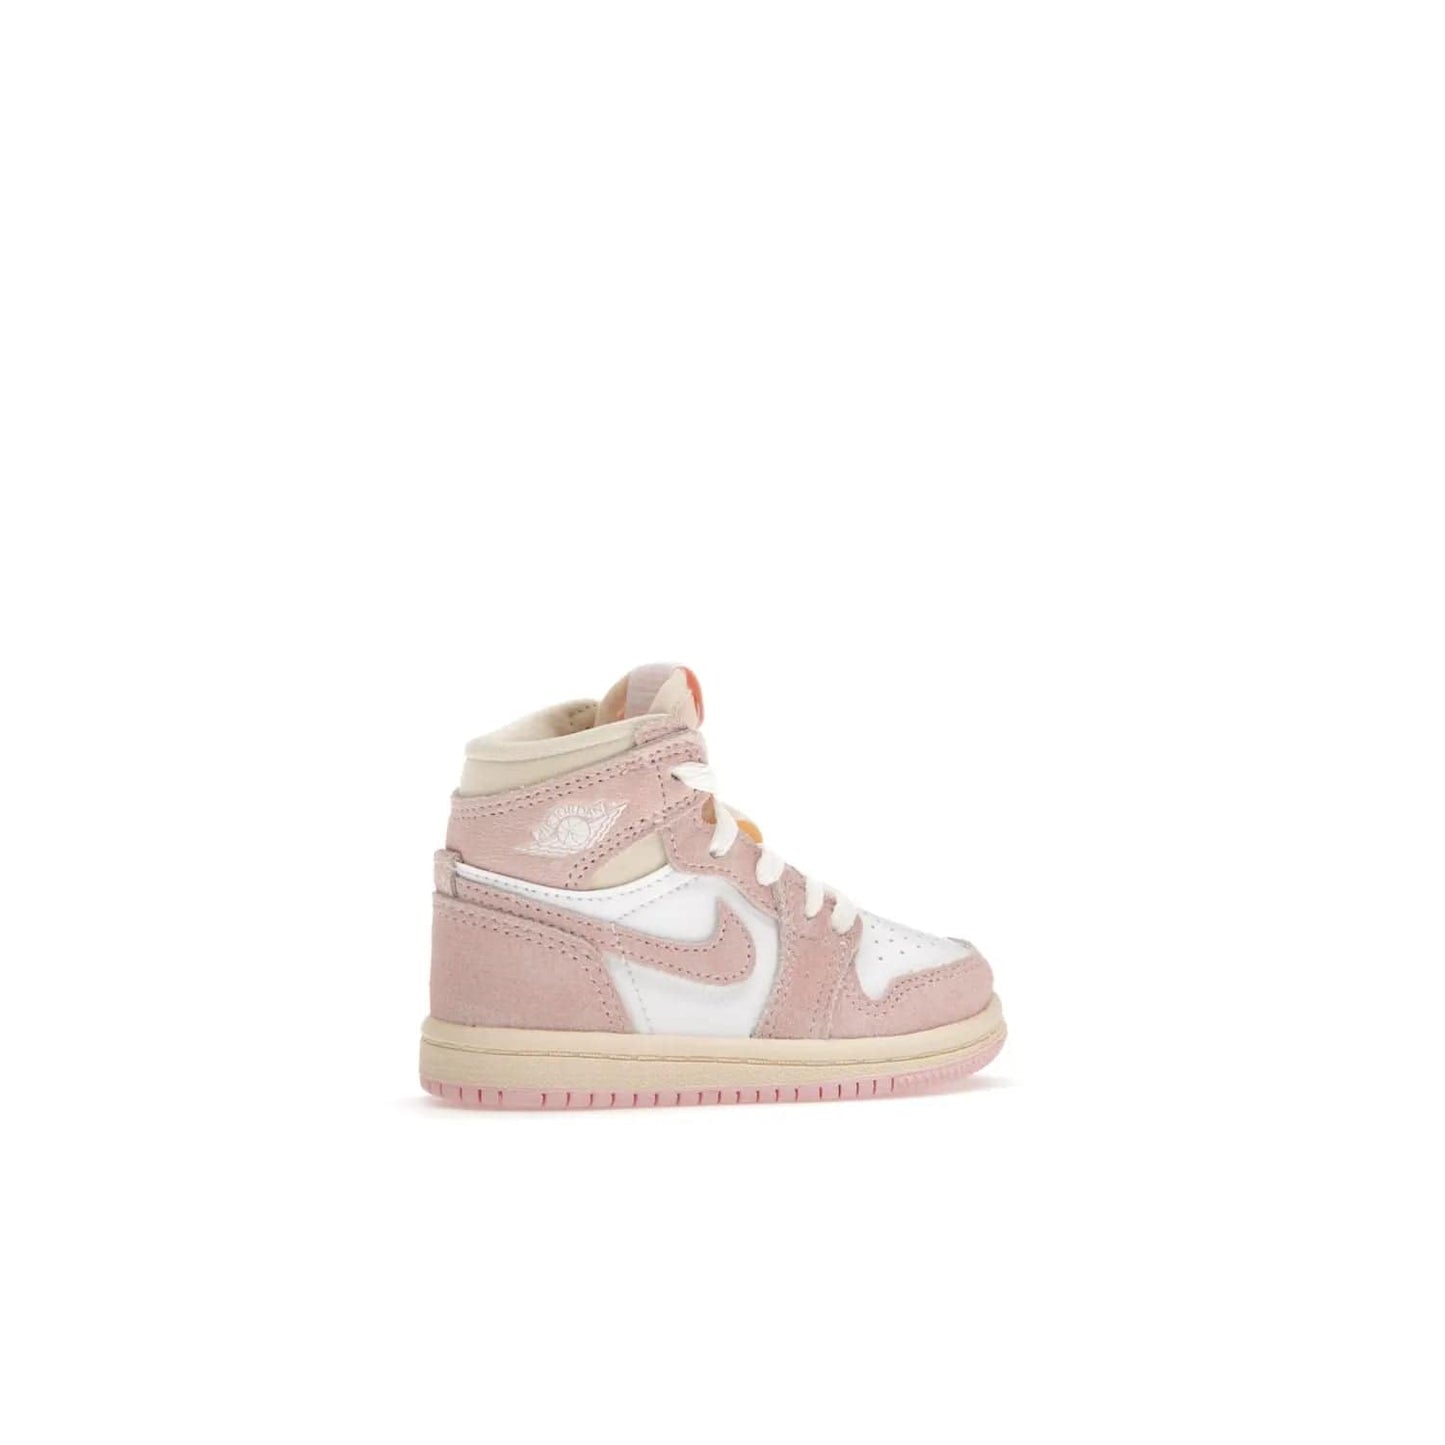 Jordan 1 Retro High OG Washed Pink (TD) - Image 35 - Only at www.BallersClubKickz.com - Retro style meets modern comfort: Introducing the Jordan 1 High OG Washed Pink (TD). Combining Atmosphere/White/Muslin/Sail colors with a high-rise silhouette, these shoes will be an instant classic when they release April 22, 2023.